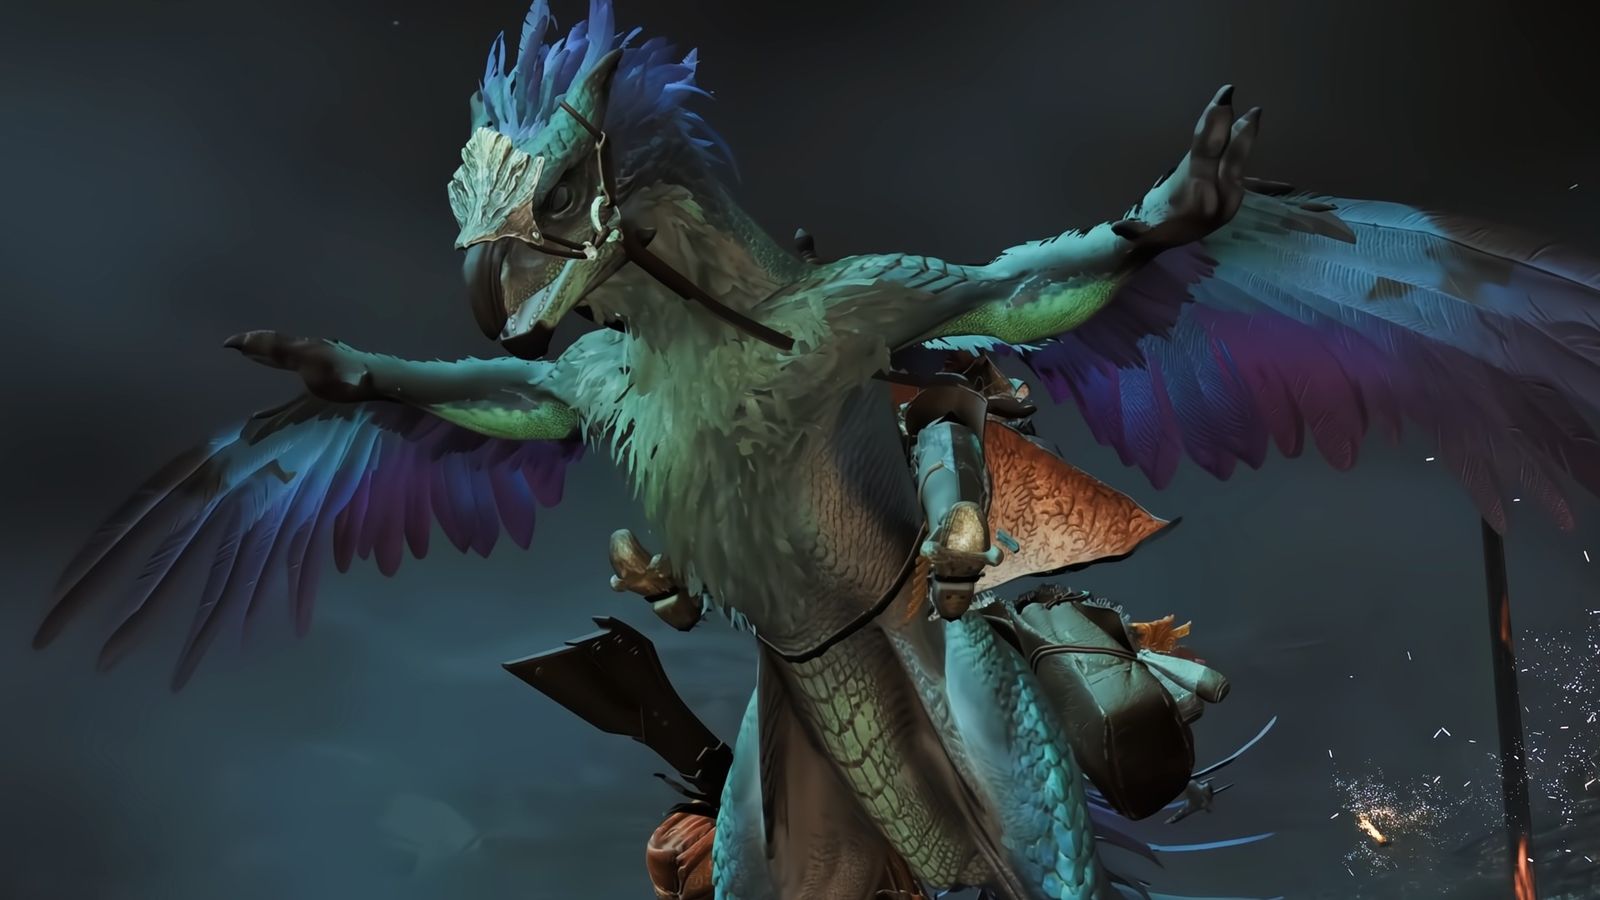 Monster Hunter Wilds - large bird creature with arms flying, with a person straddling it back